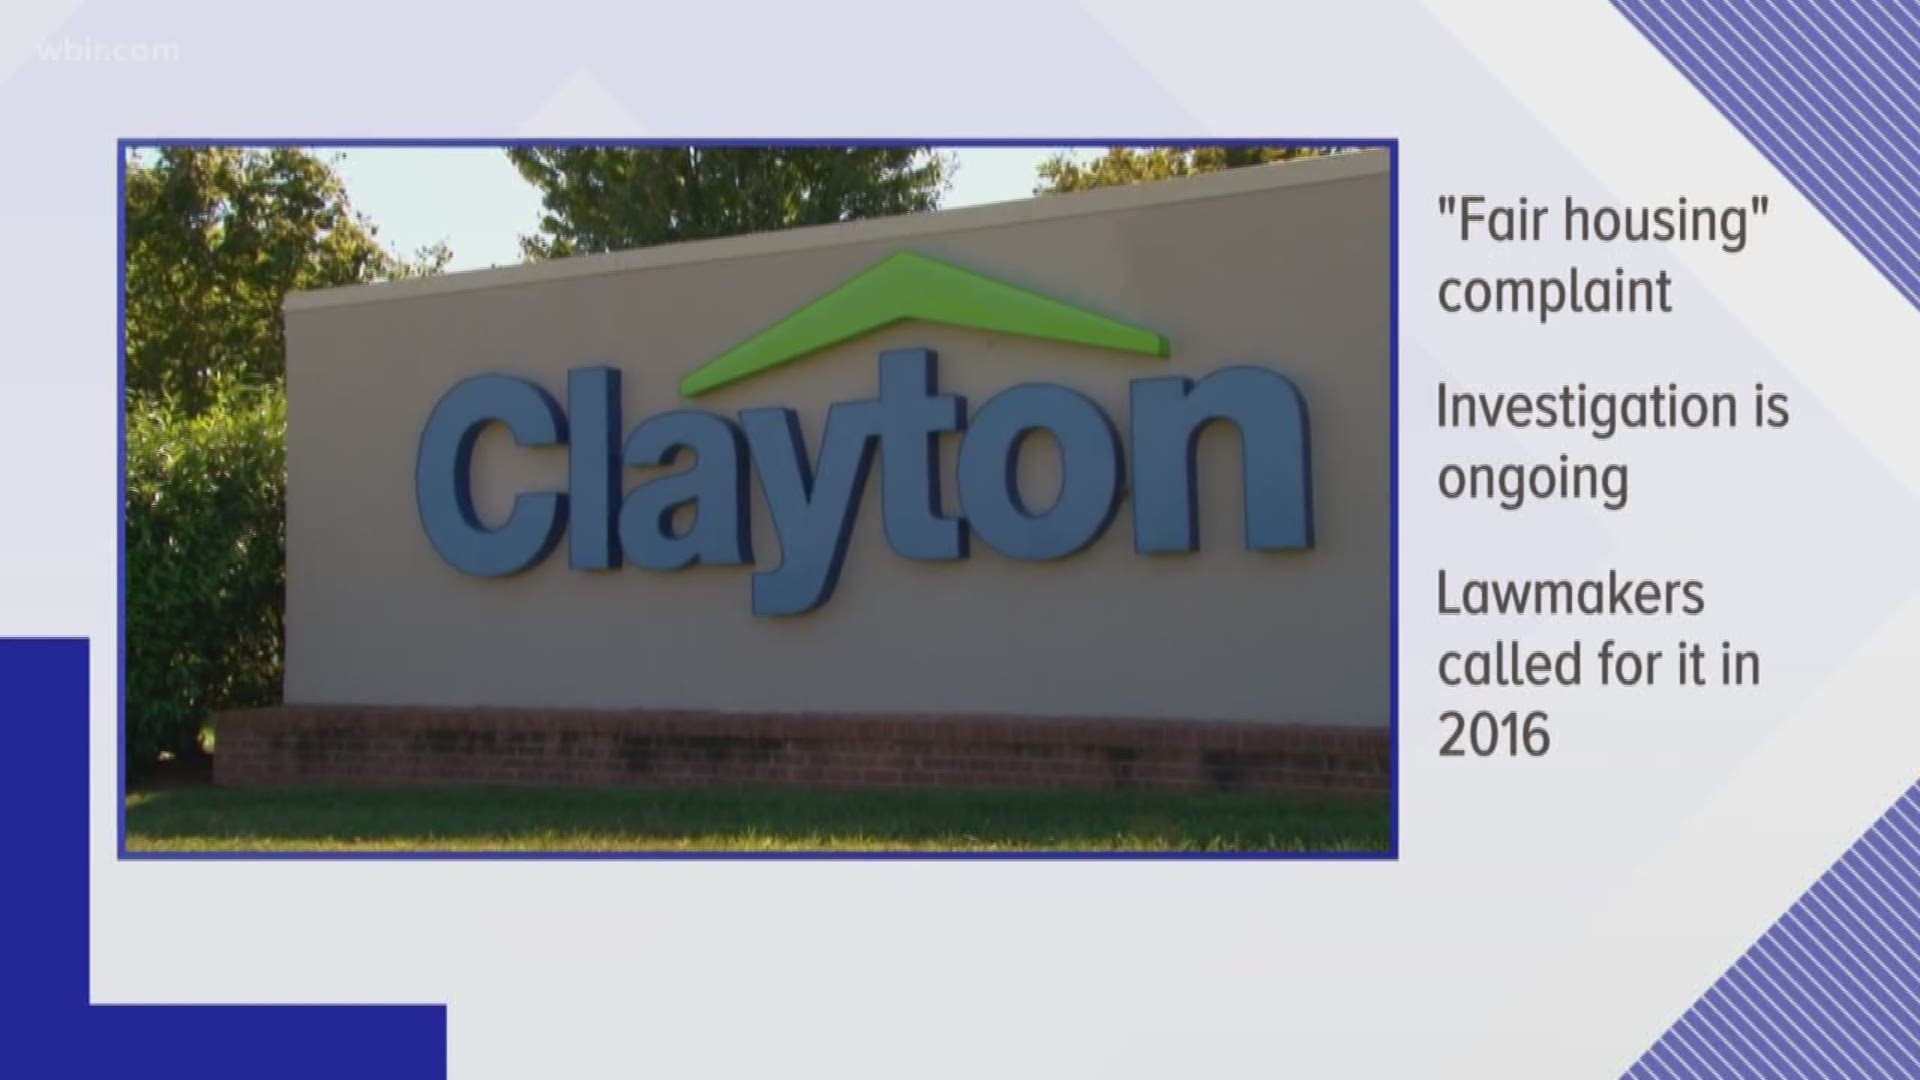 Federal authorities are investigating Clayton Homes for possibly discriminating against minority borrowers.